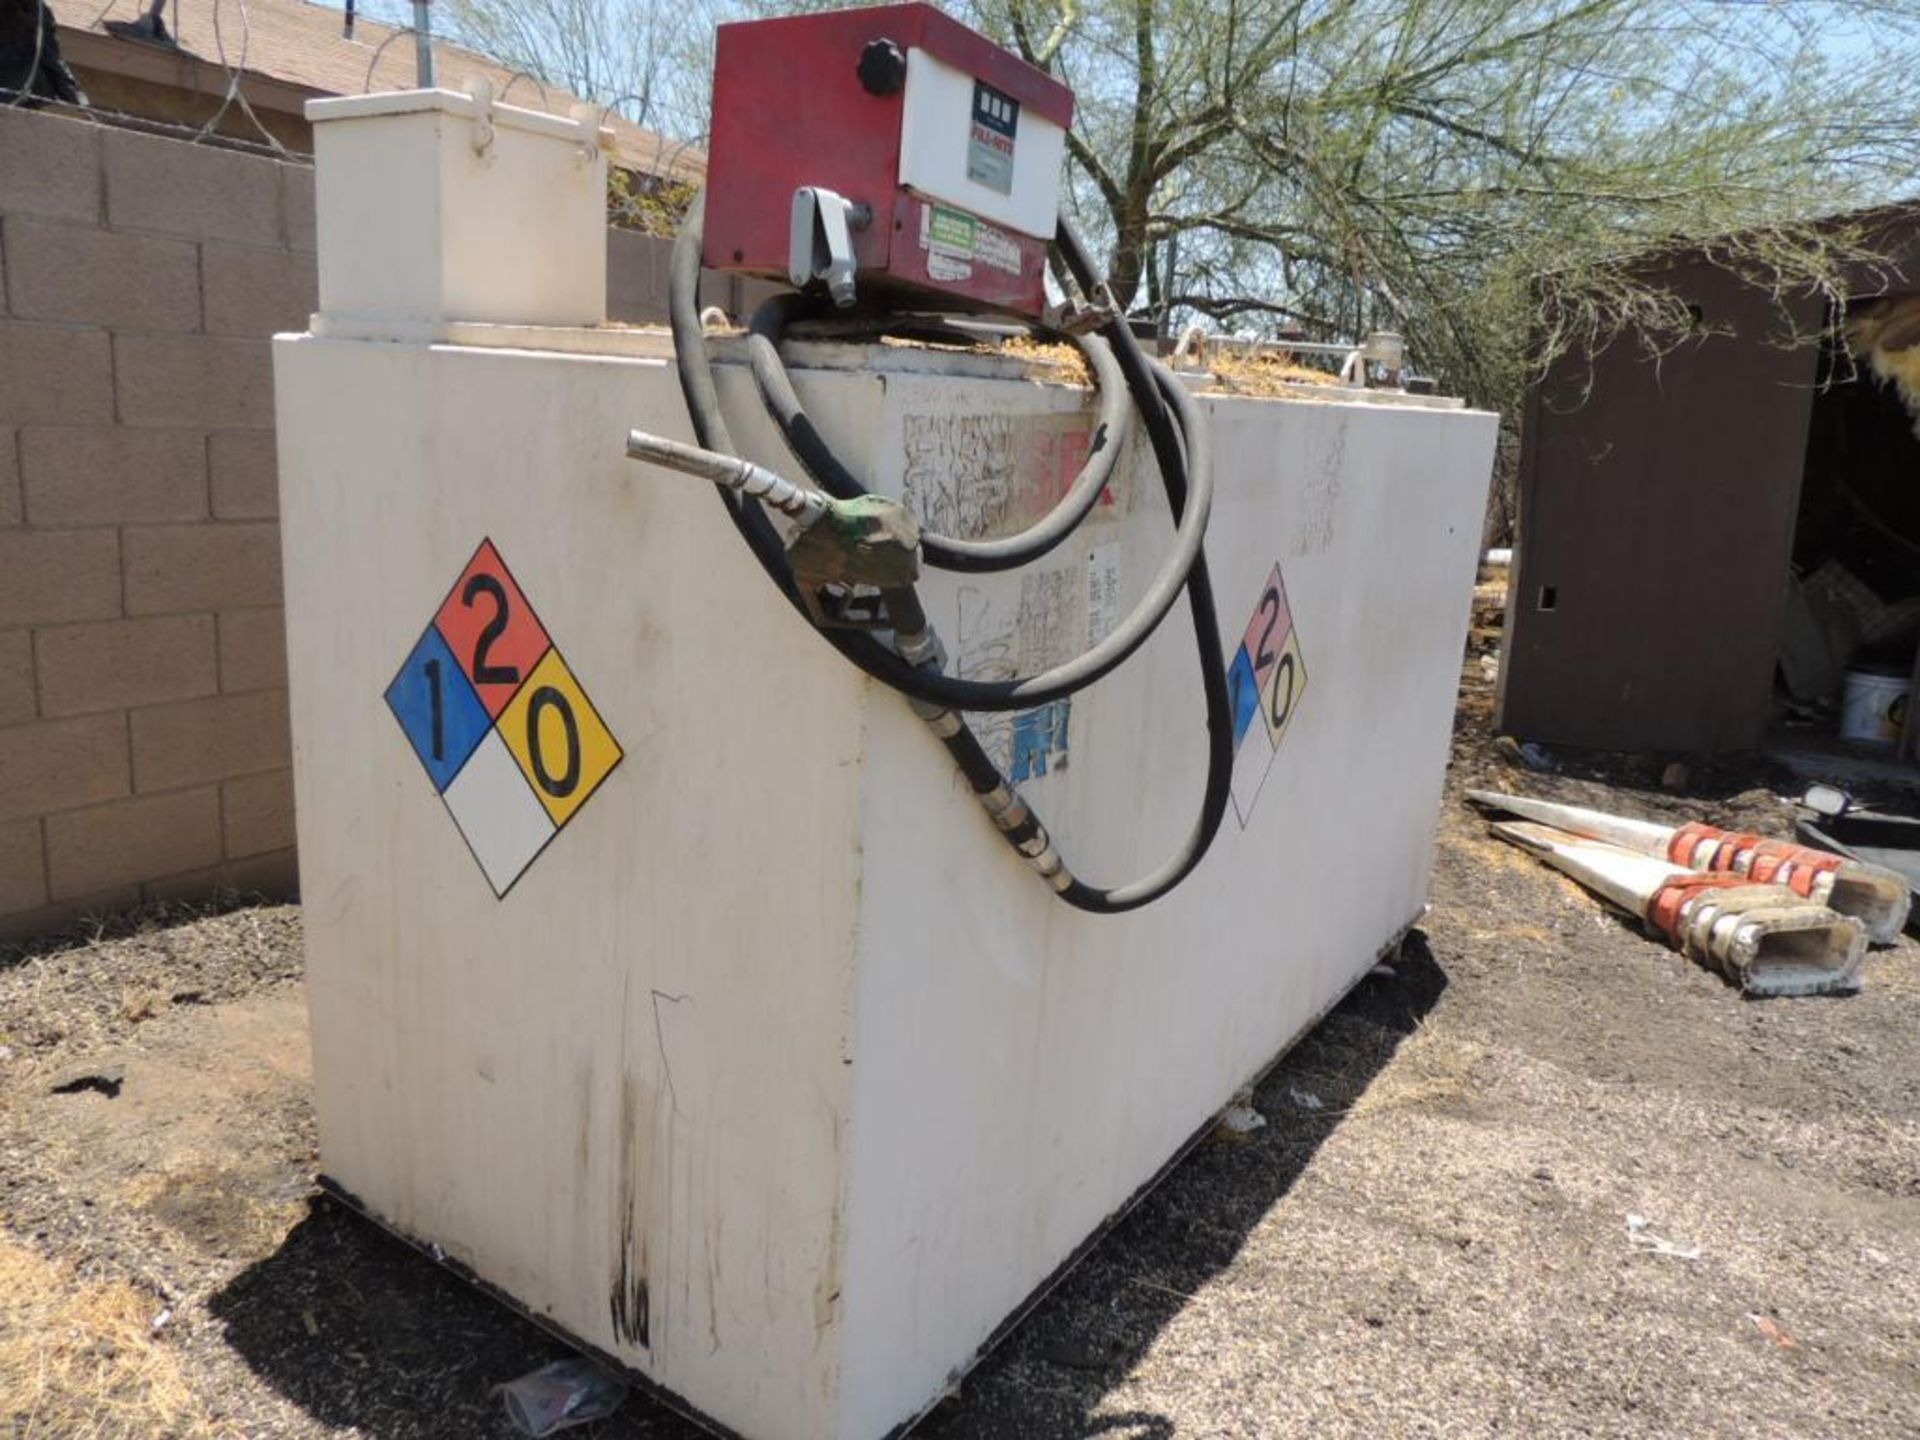 Fuel Tank, 1000 Gallon Fill-Rite Pump and Meter, LOCATION: 2435 S. 6th Ave., Phoenix, AZ 85003 - Image 2 of 2